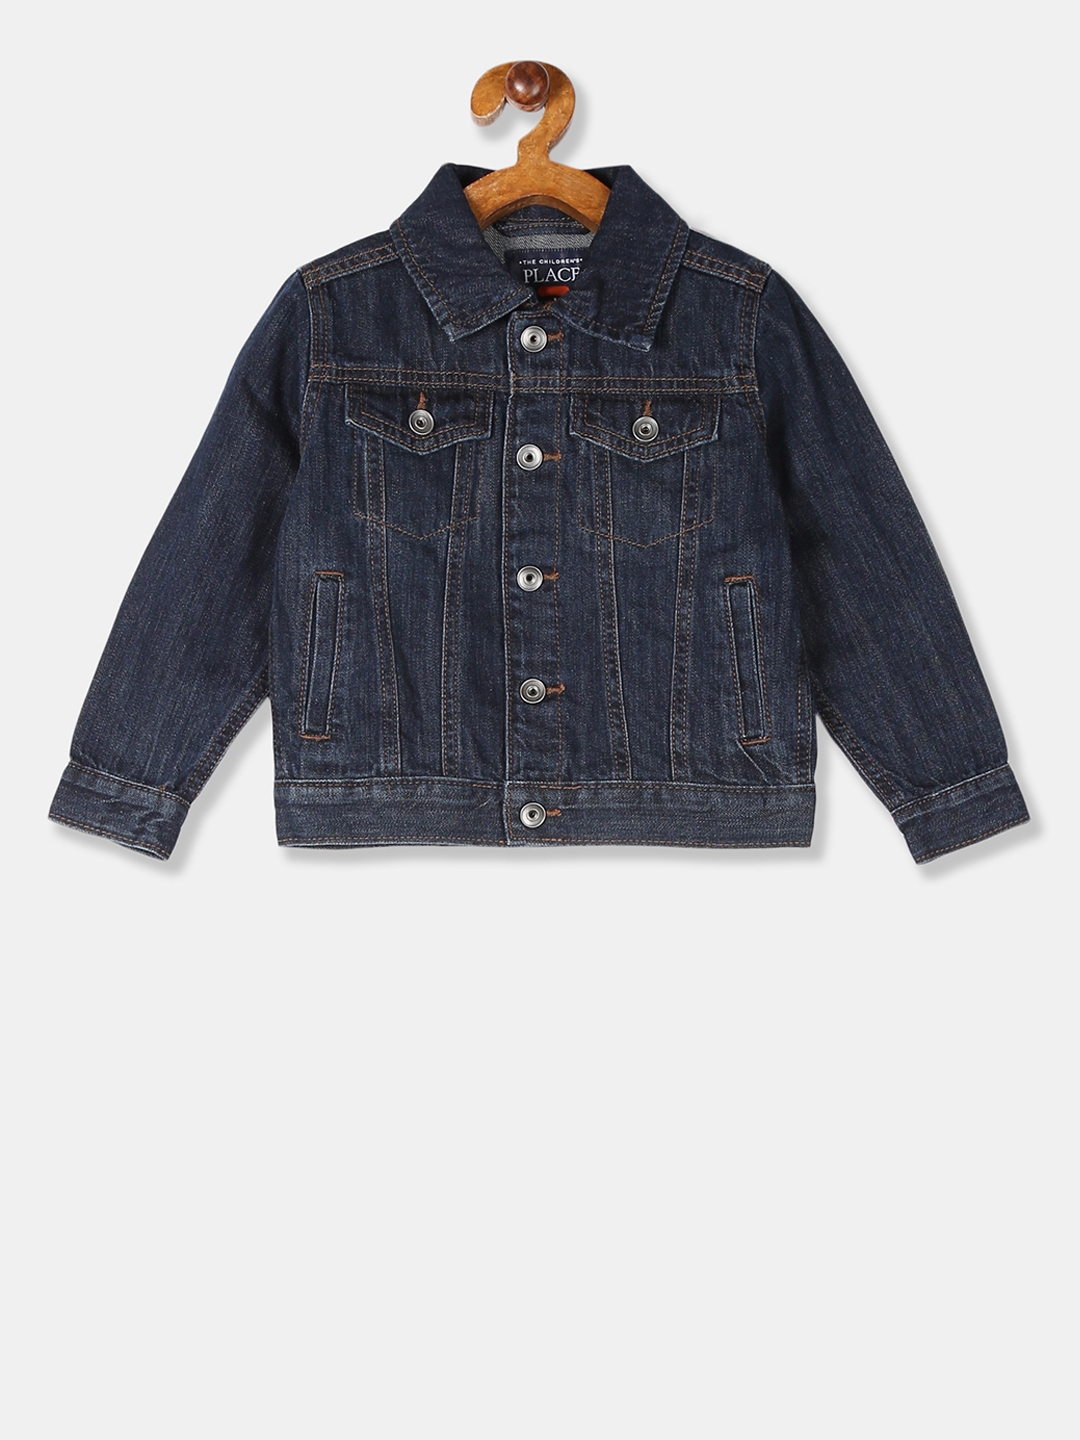 Buy The Childrens Place Boys Blue Solid Denim Jacket - Jackets for Boys ...